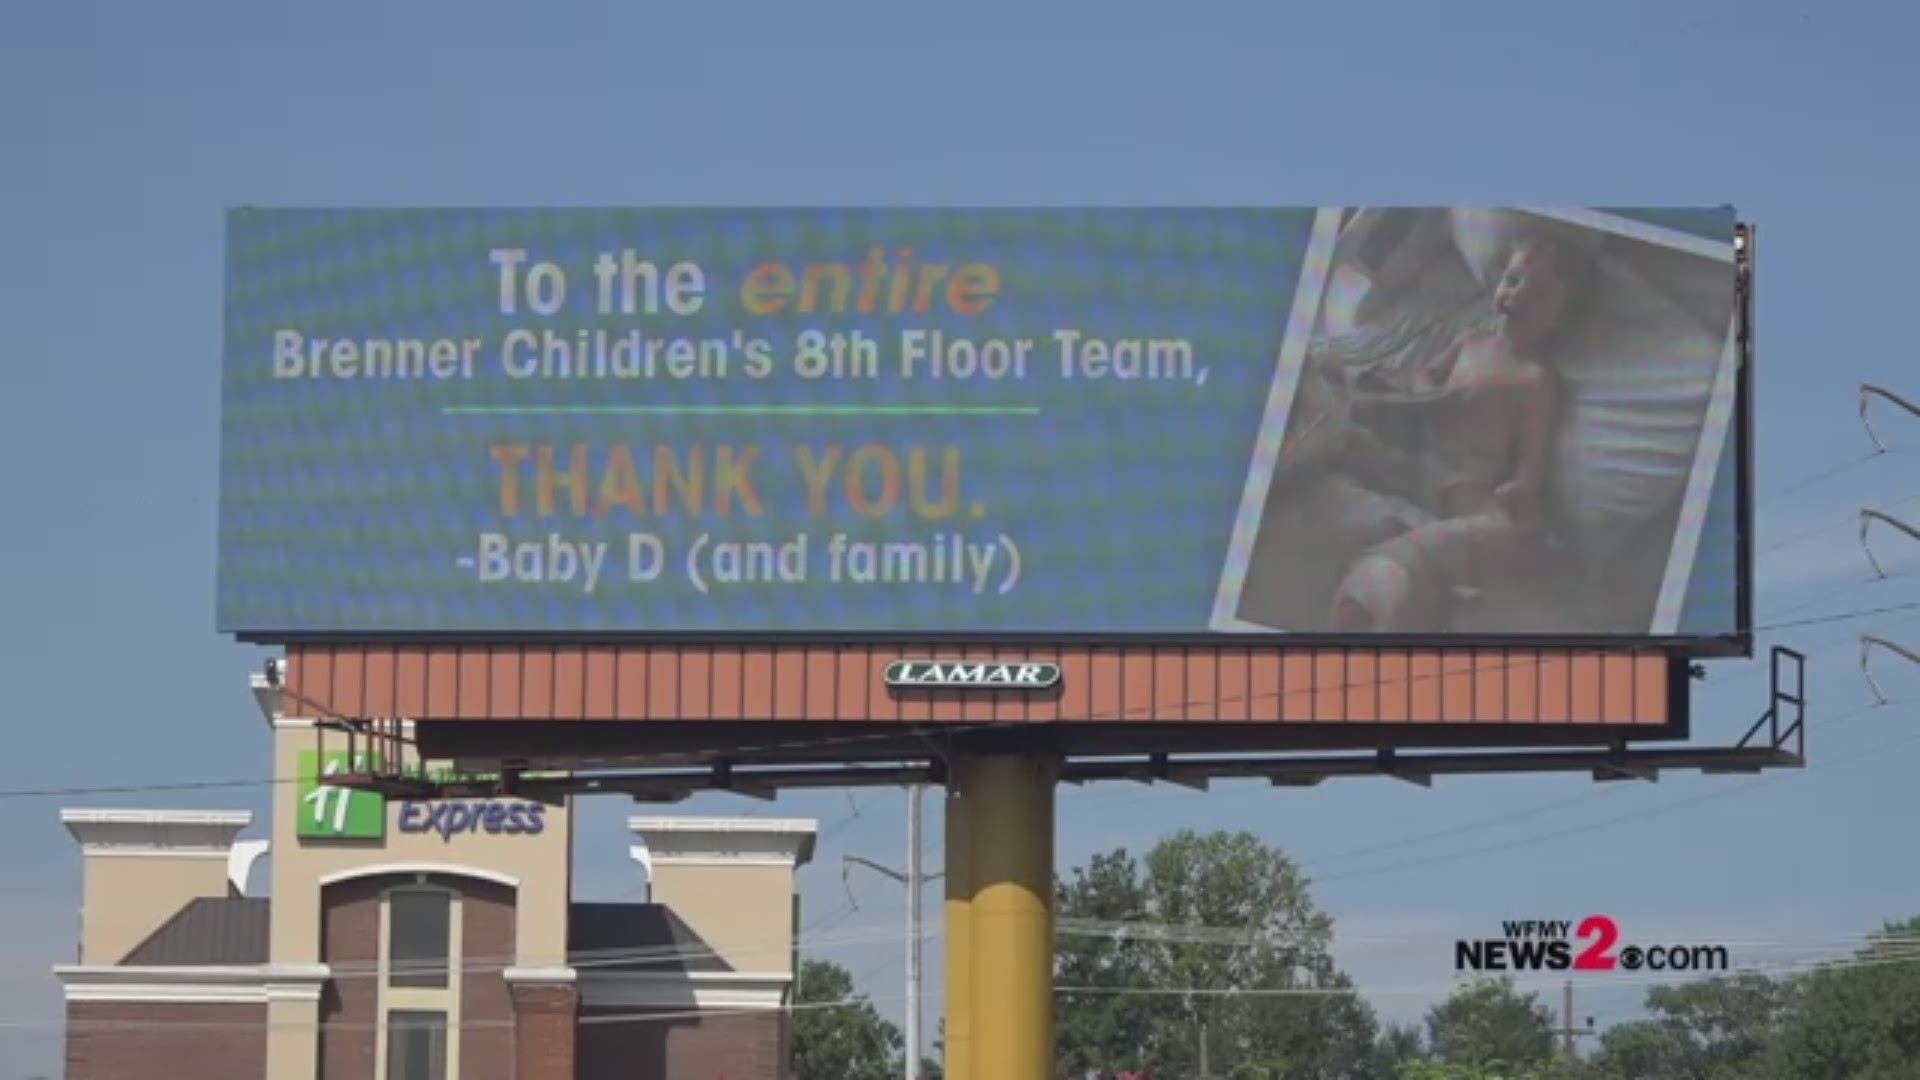 After a trip to the Brenner Children's Hospital, a dad thought the best way to thank the staff for caring for his baby was to set up a billboard. The message reads "To the entire Brenner Children's 8th Floor Team, Thank You. Baby D (and family)."